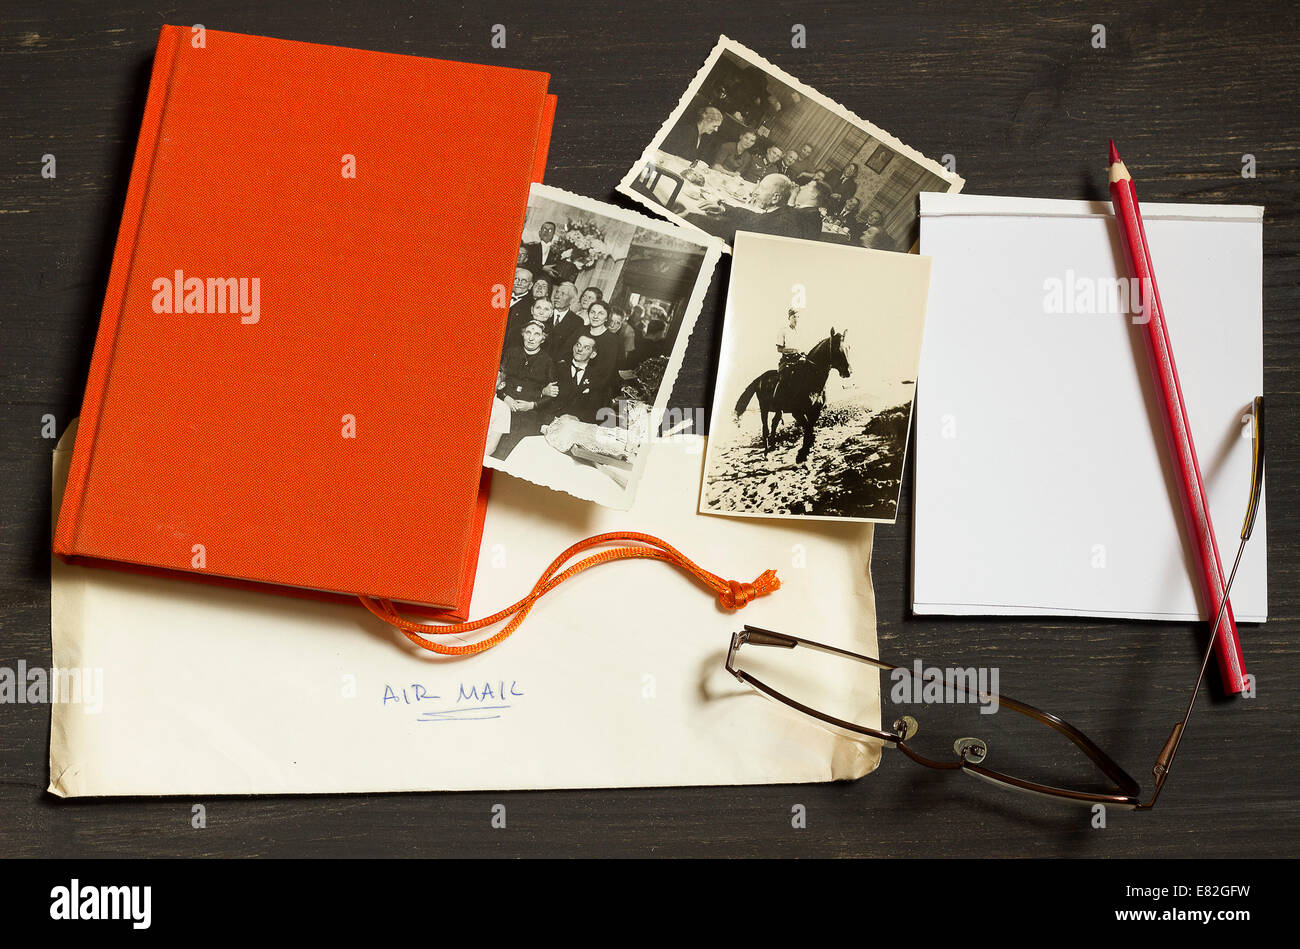 Family history, Genealogical research, Old pictures from Second World War, Air Mail, Red book,  Notepad with coloured pencil and reading glasses Stock Photo